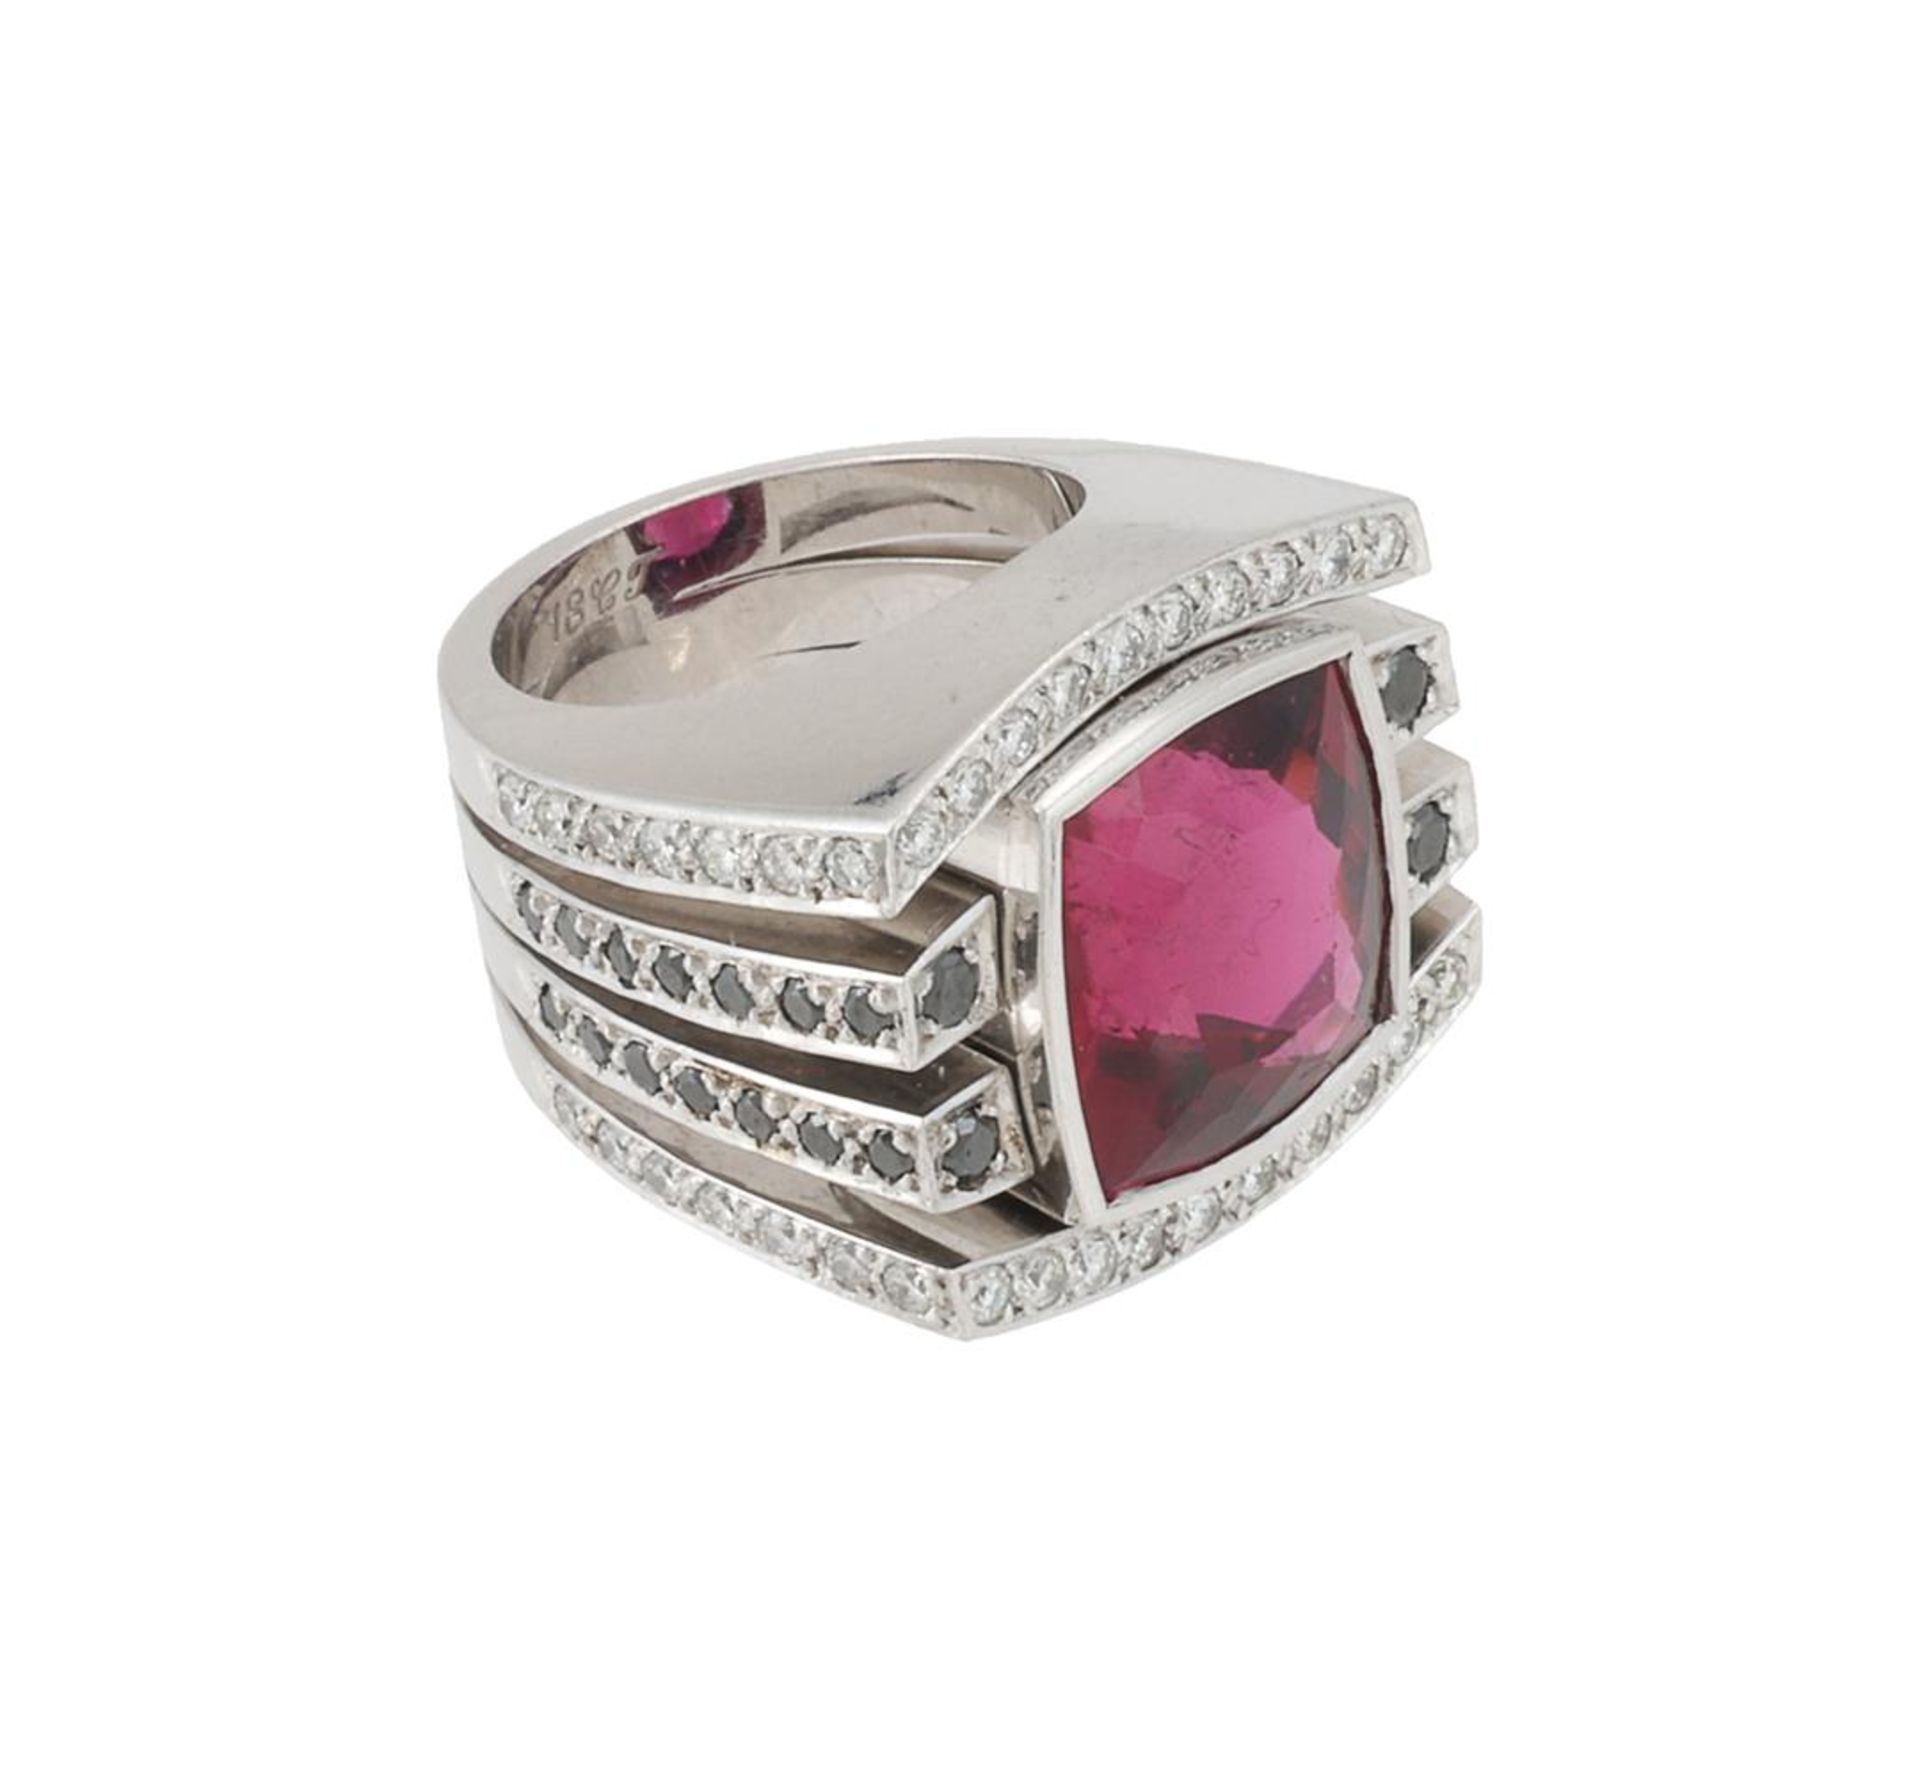 STEPHEN WEBSTER, A PINK TOURMALINE AND DIAMOND DRESS RING - Image 2 of 2